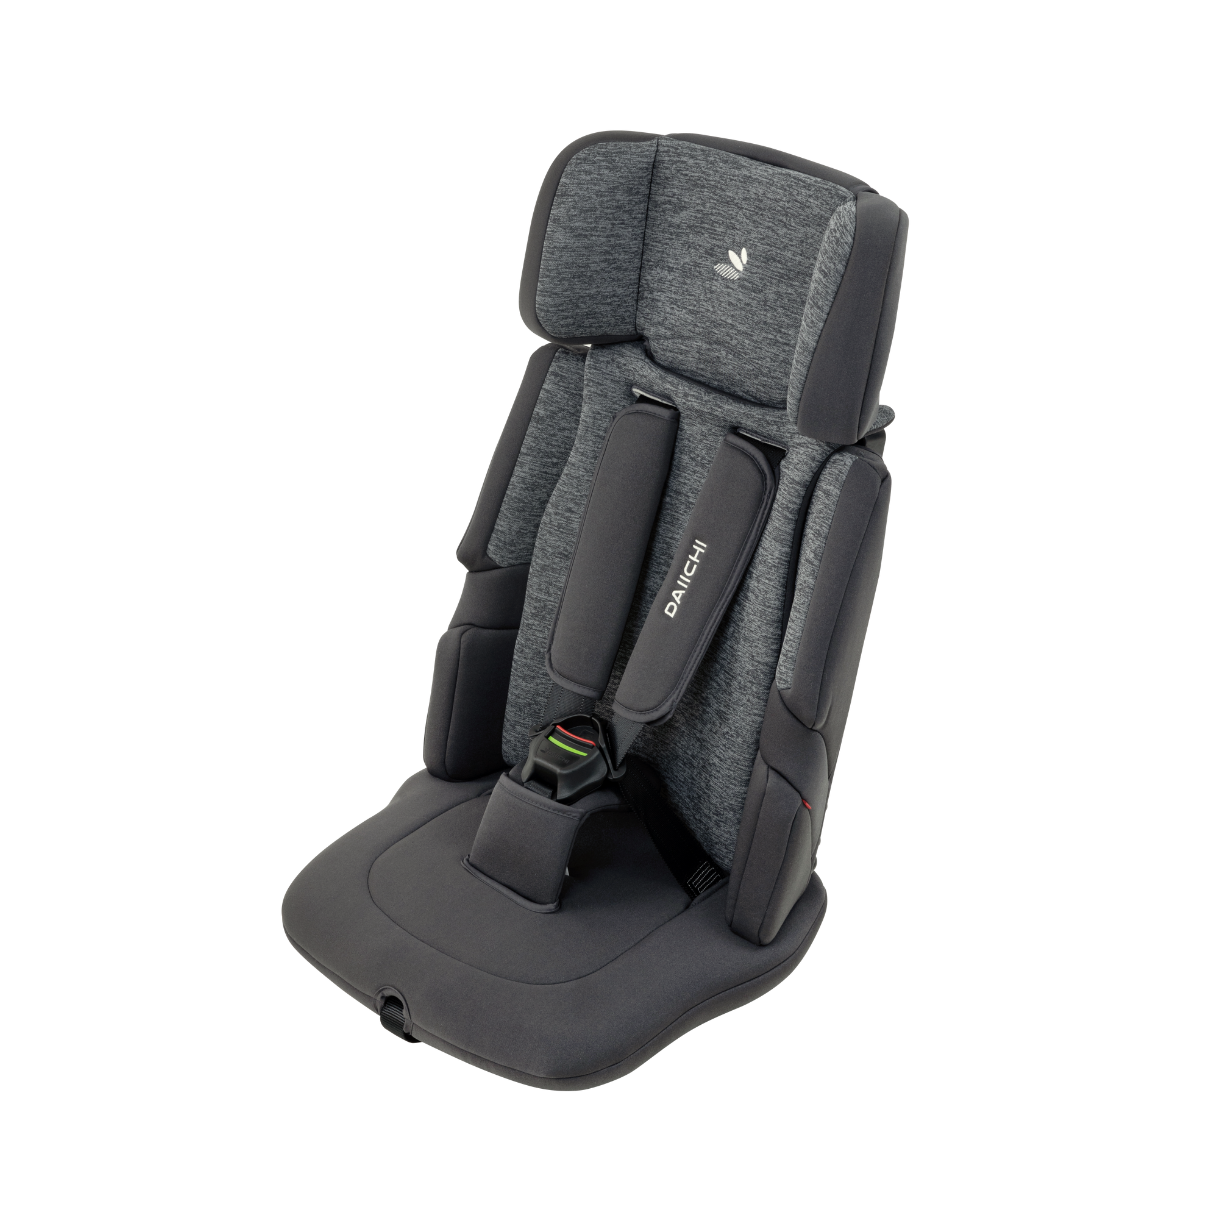 Daiichi Easy Carry 2 Portable Car Seat - Charcoal - Pre Order Early May 24